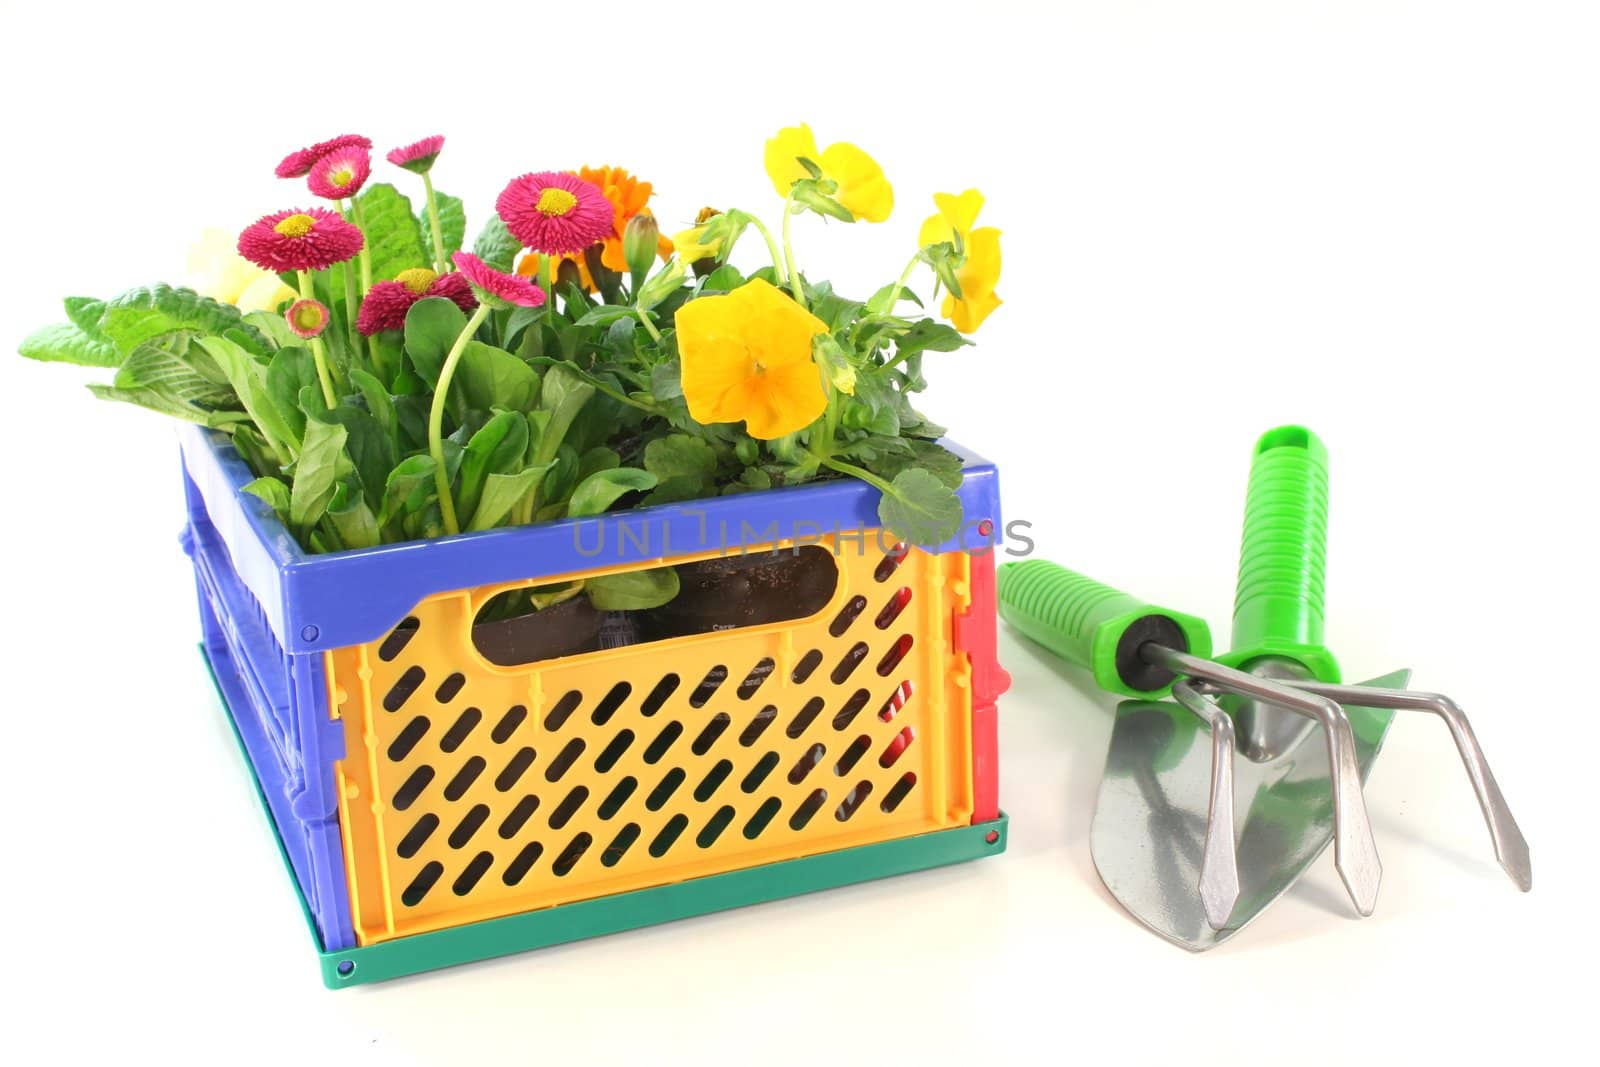 Balcony plants in a folding box with shovel and grubber